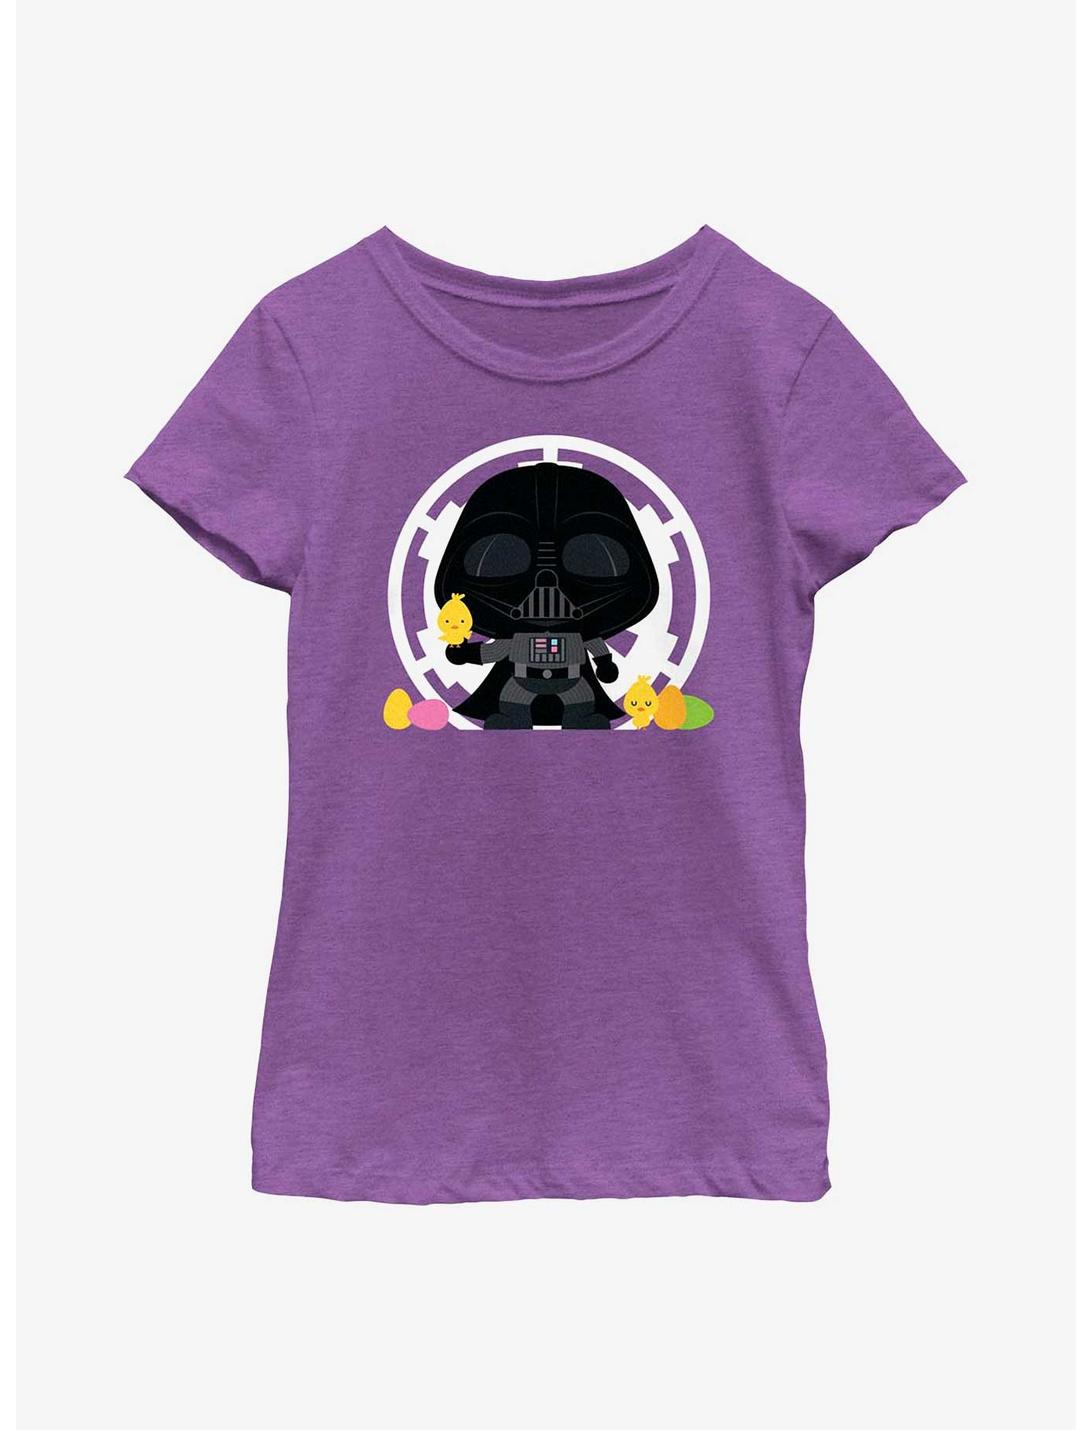 Star Wars Vader Easter Youth Girls T-Shirt, PURPLE BERRY, hi-res